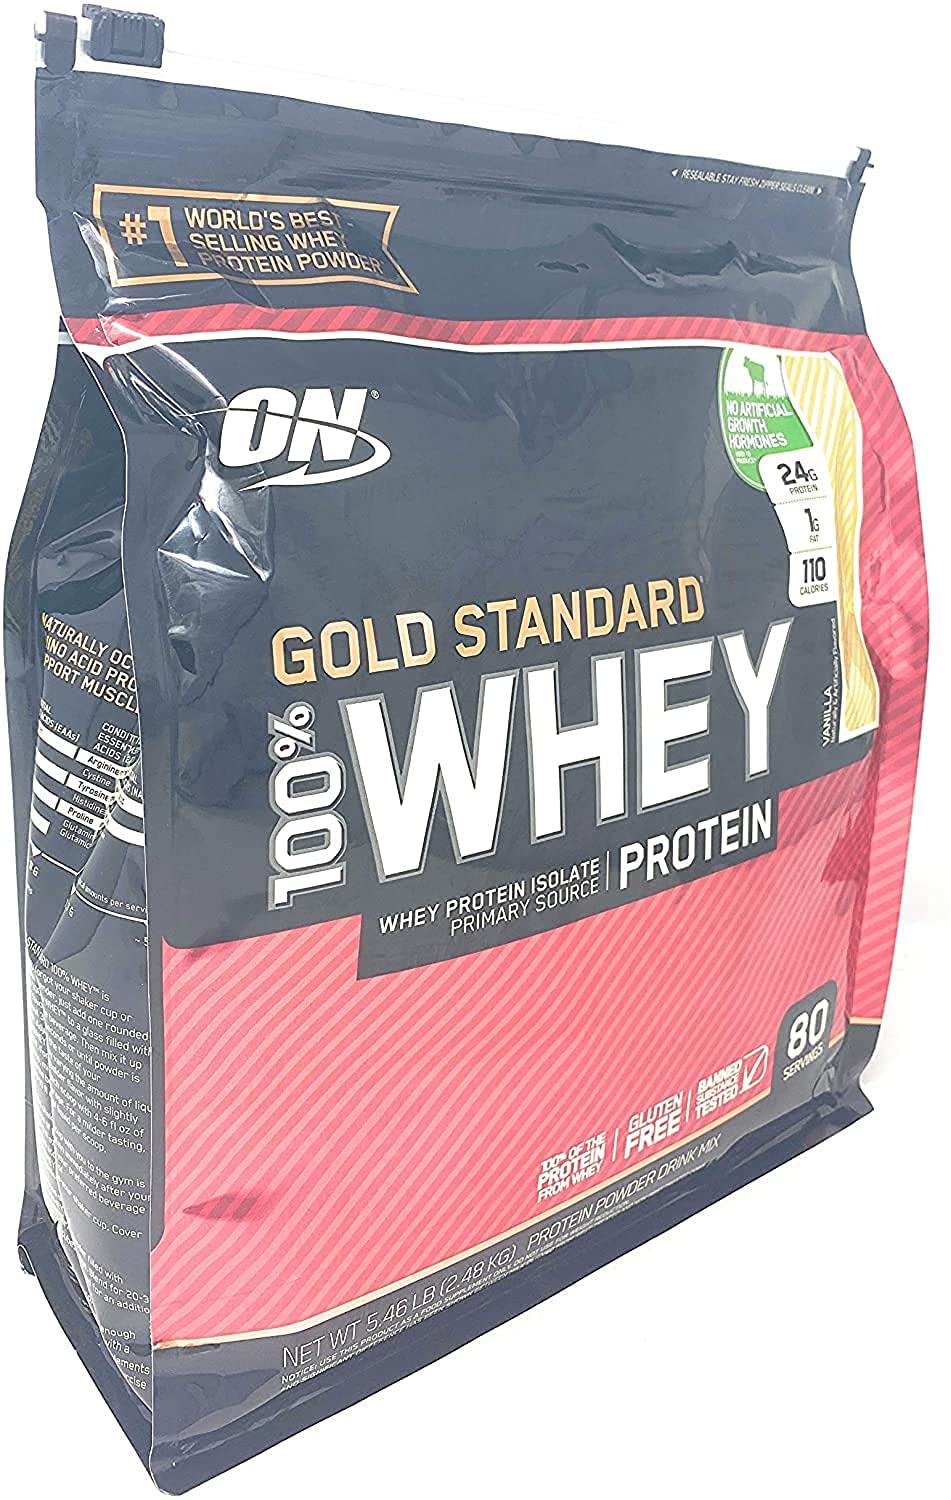 Get ON's Gold Standard Whey Protein at Body Energy Club